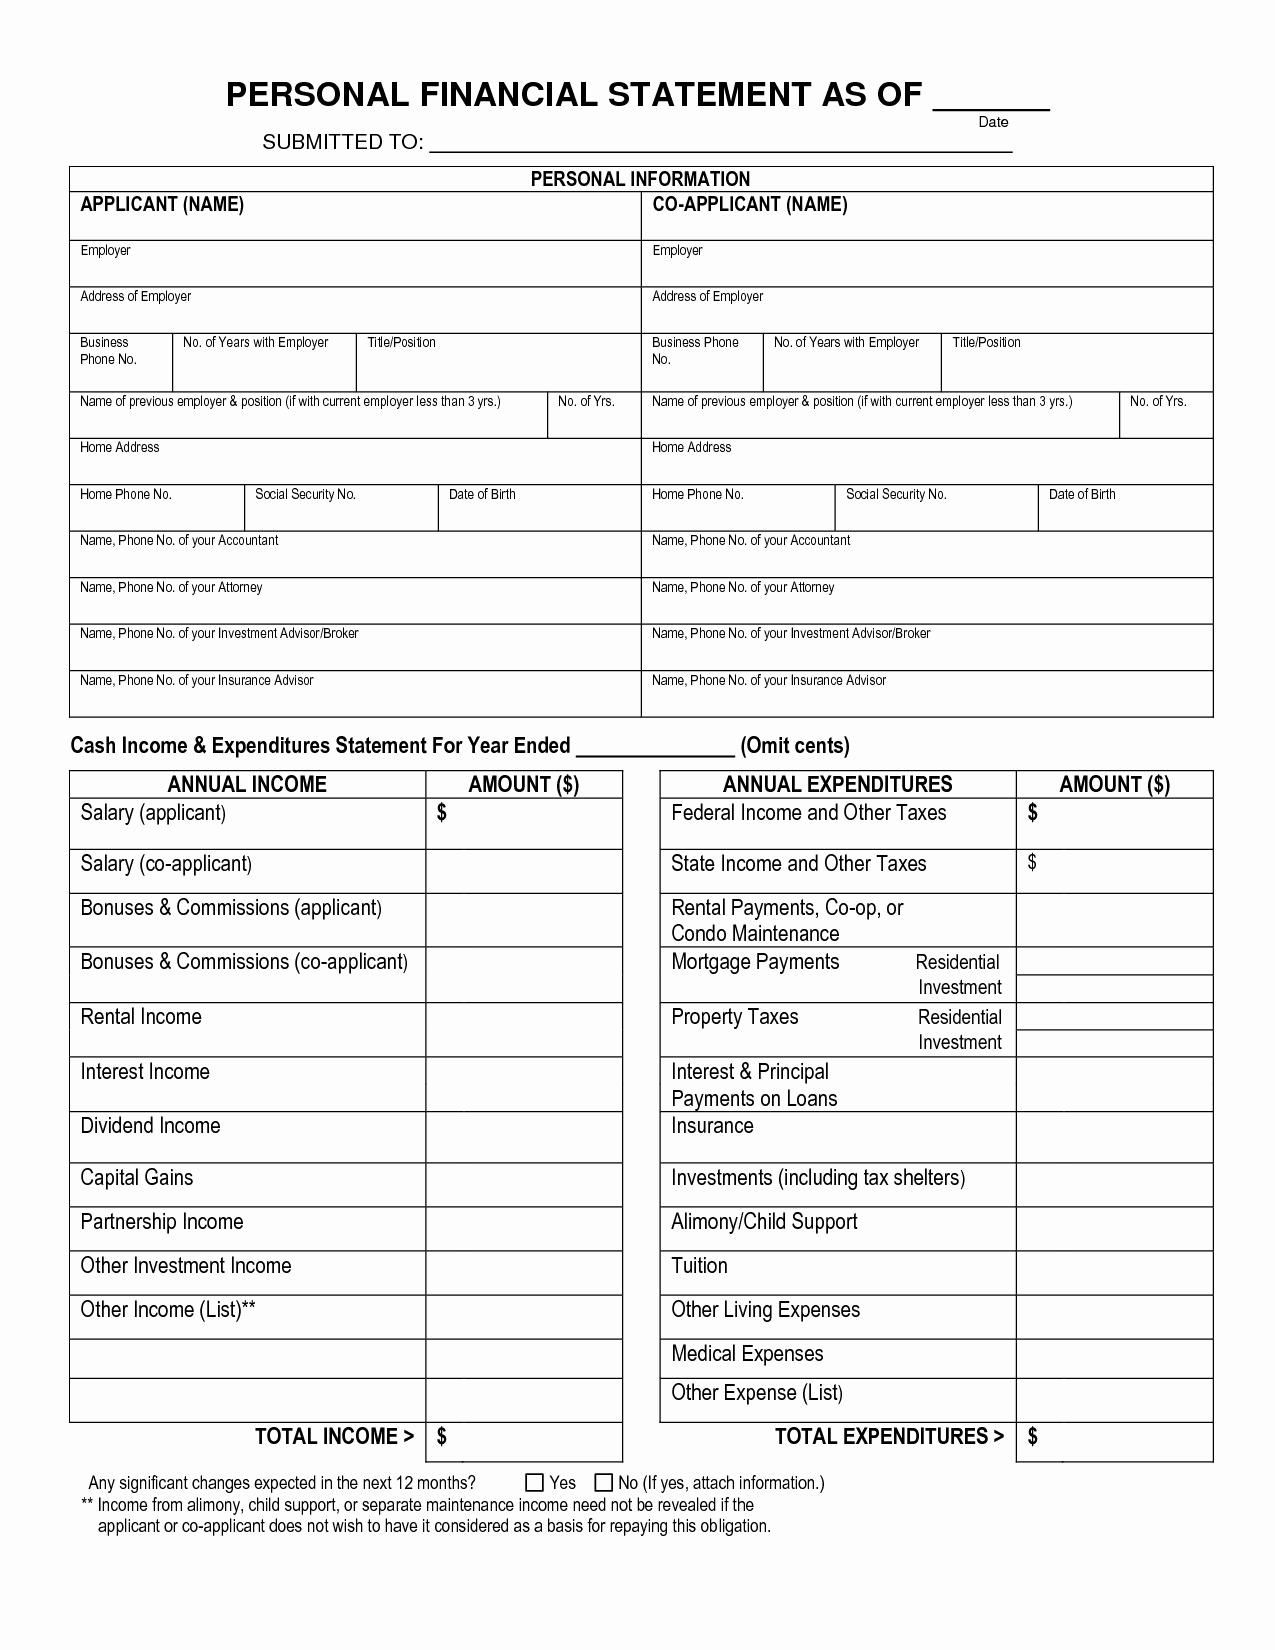 Personal Info forms Template Luxury Free Printable Personal Financial Statement